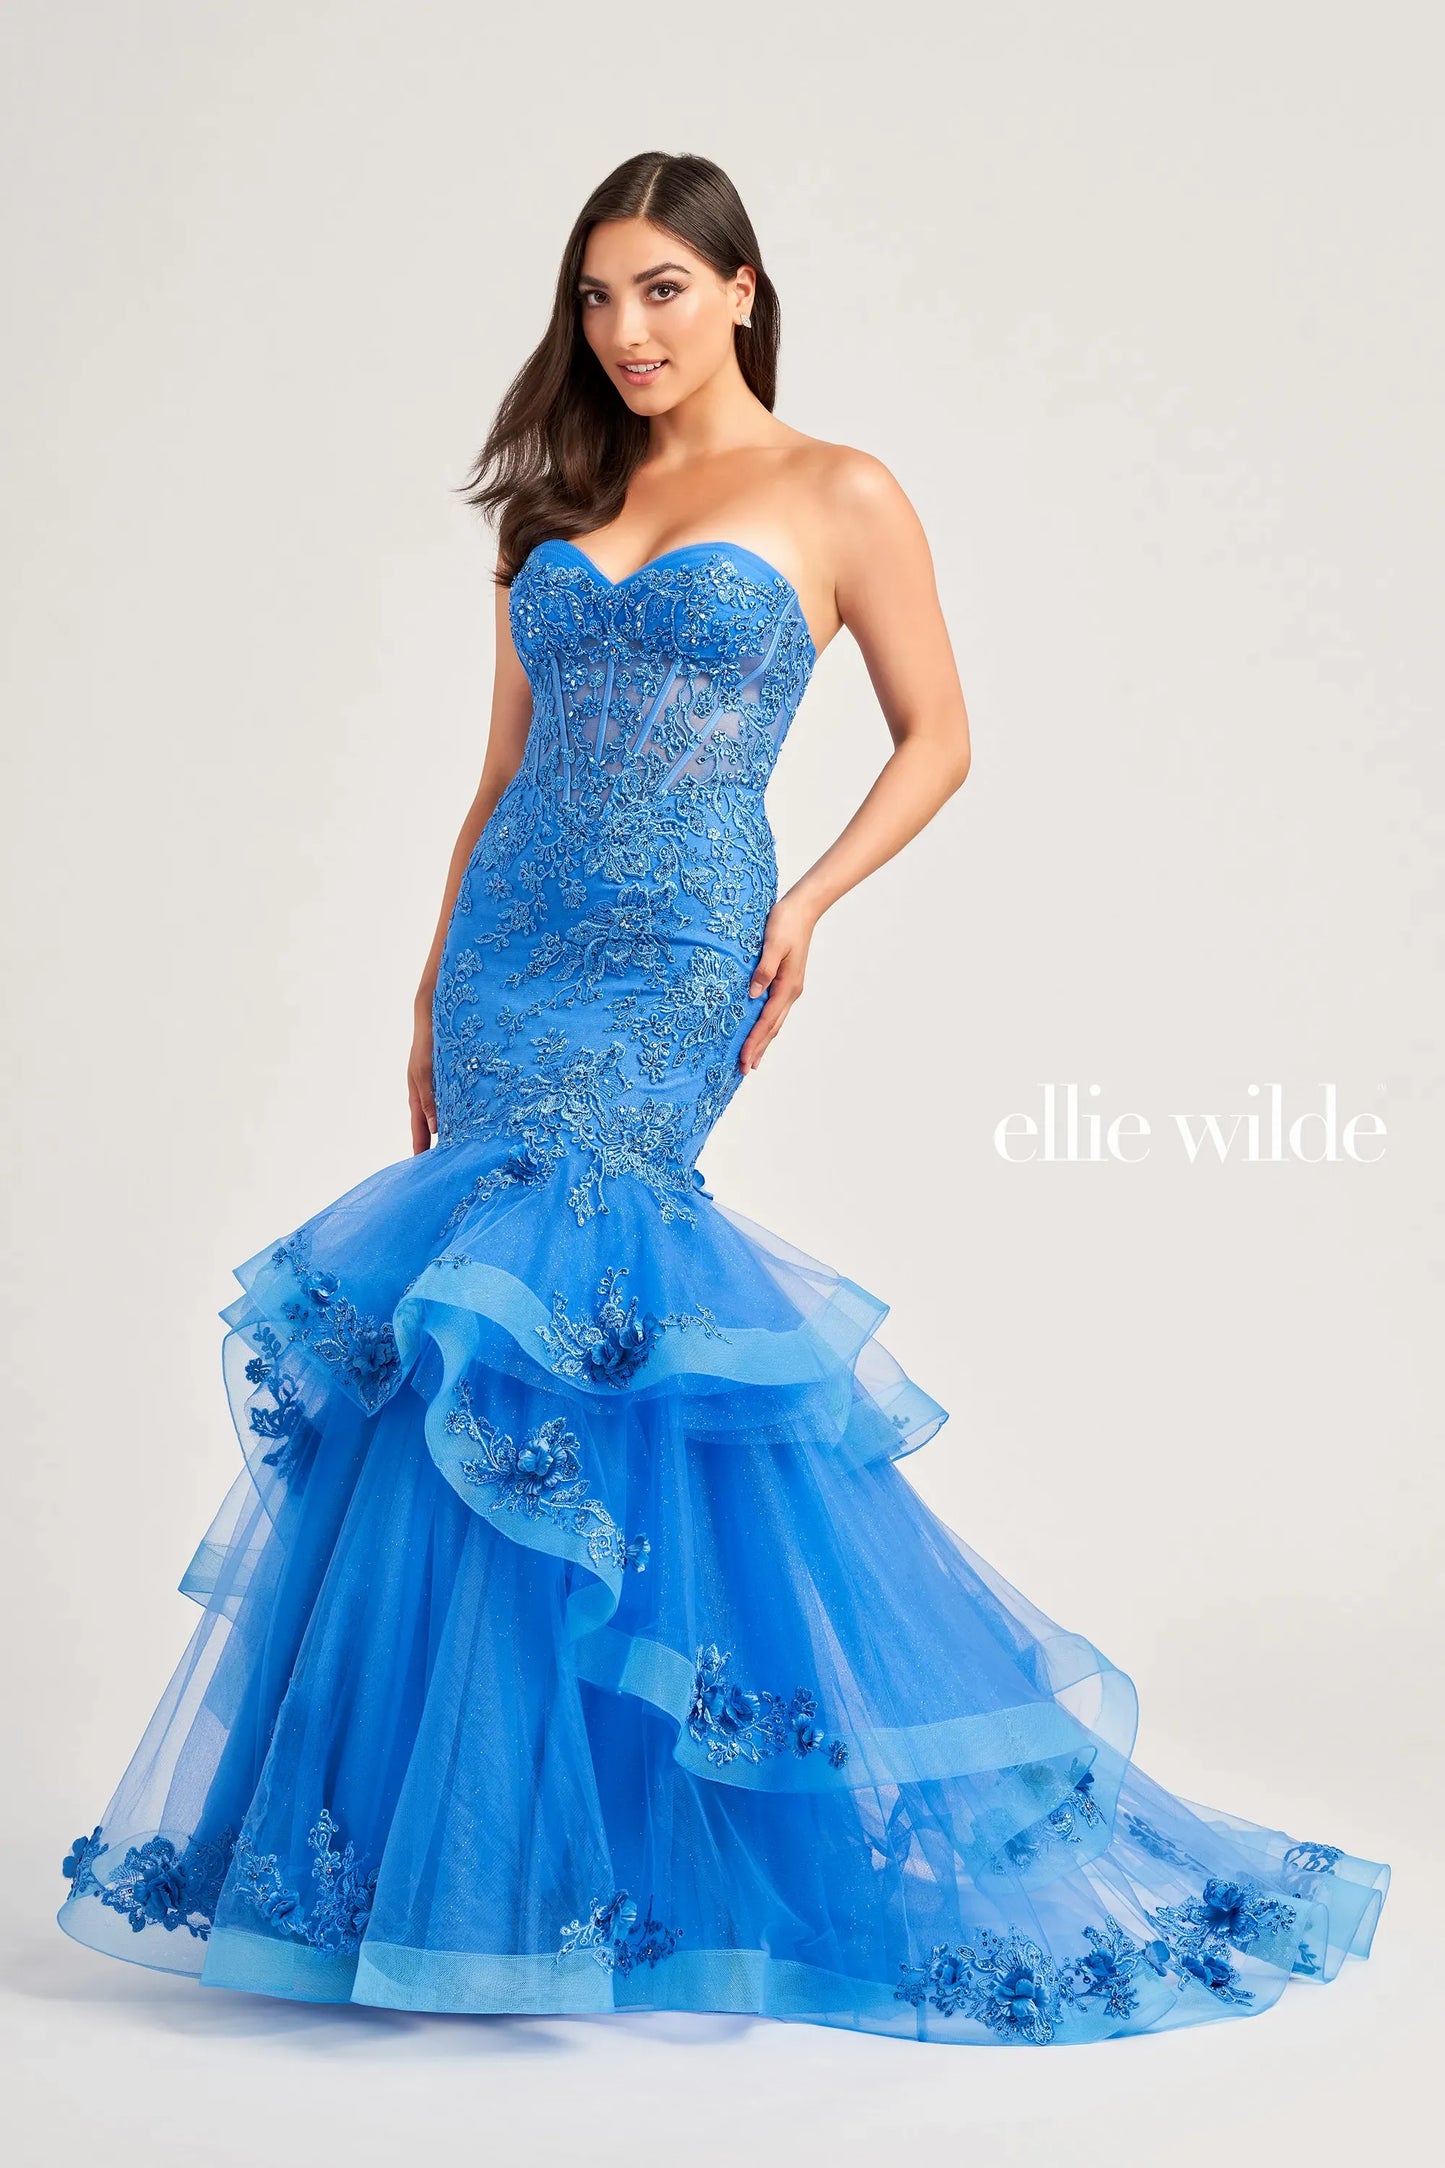 Get ready to make a statement in this Ellie Wilde EW35239 mermaid prom dress. The sheer corset lace bodice is adorned with embroidered and glitter tulle, while the ruffle layer skirt shimmers with stone accents and 3D flowers. You'll be the belle of the ball in this stunning dress.  Sizes: 00-16  Colors: Ocean Blue, Lilac, Red